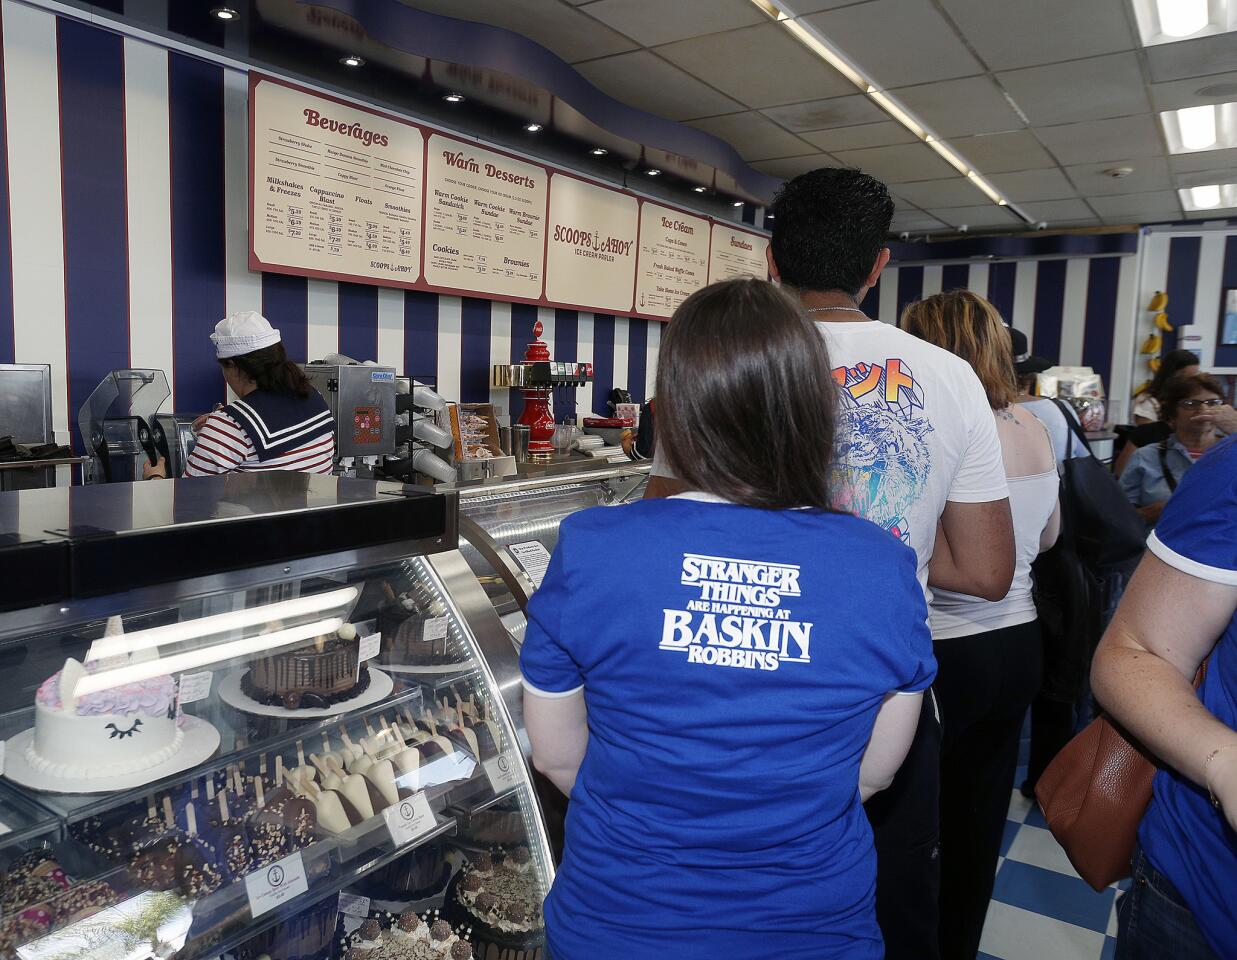 Photo Gallery: Burbank Baskin Robbins transforms into the Stranger Thing's Scoops Ahoy Ice Cream Parlor